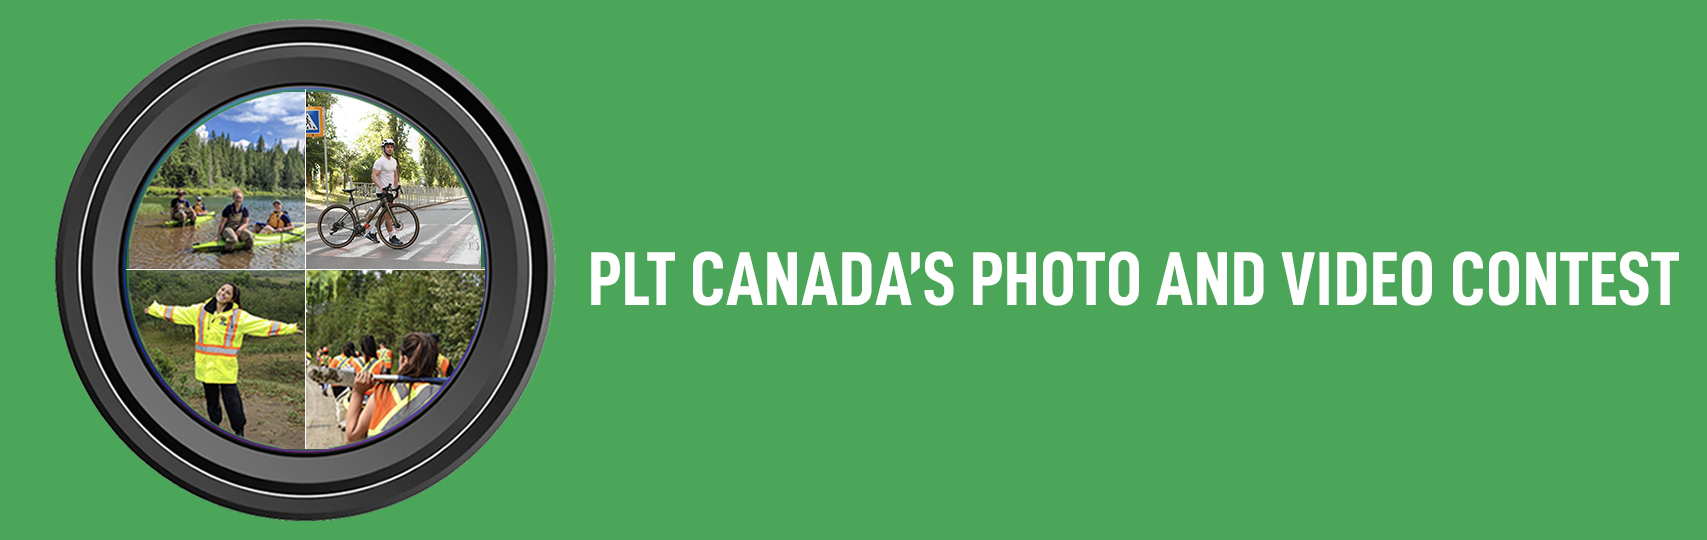 PLT Canada's photo and video contest